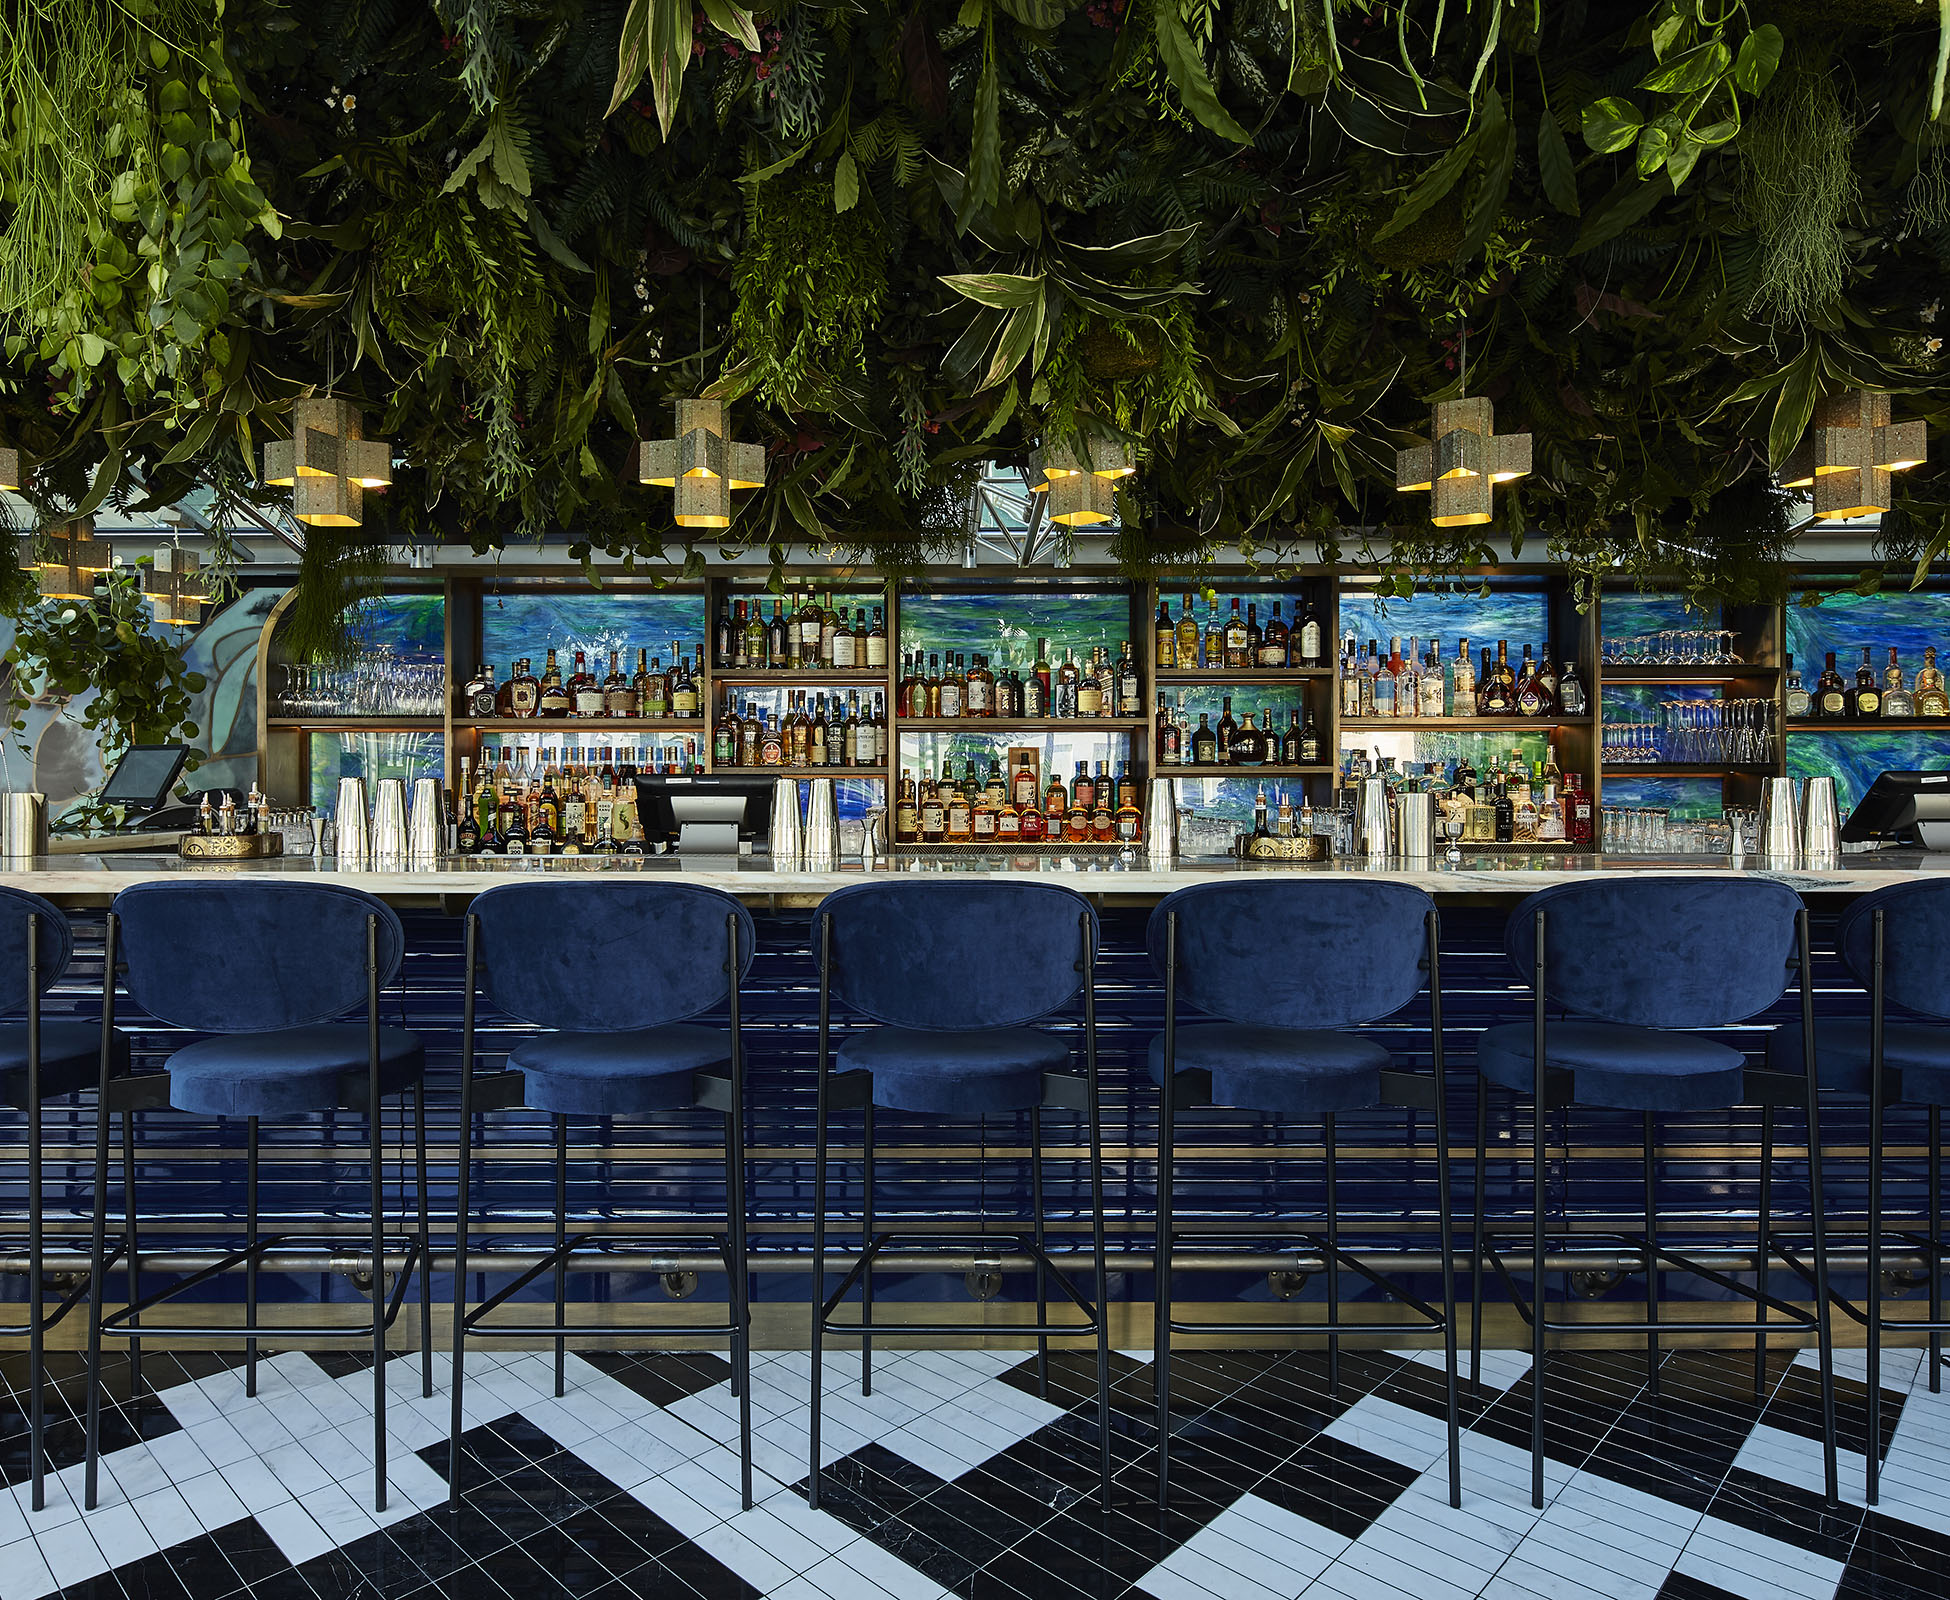 A suspended living ceiling of plants hovers above the cocktail bar at Sushisamba Covent Garden. It is created using a diverse range of plants from Asia and South America to reflect the restaurant’s origins.